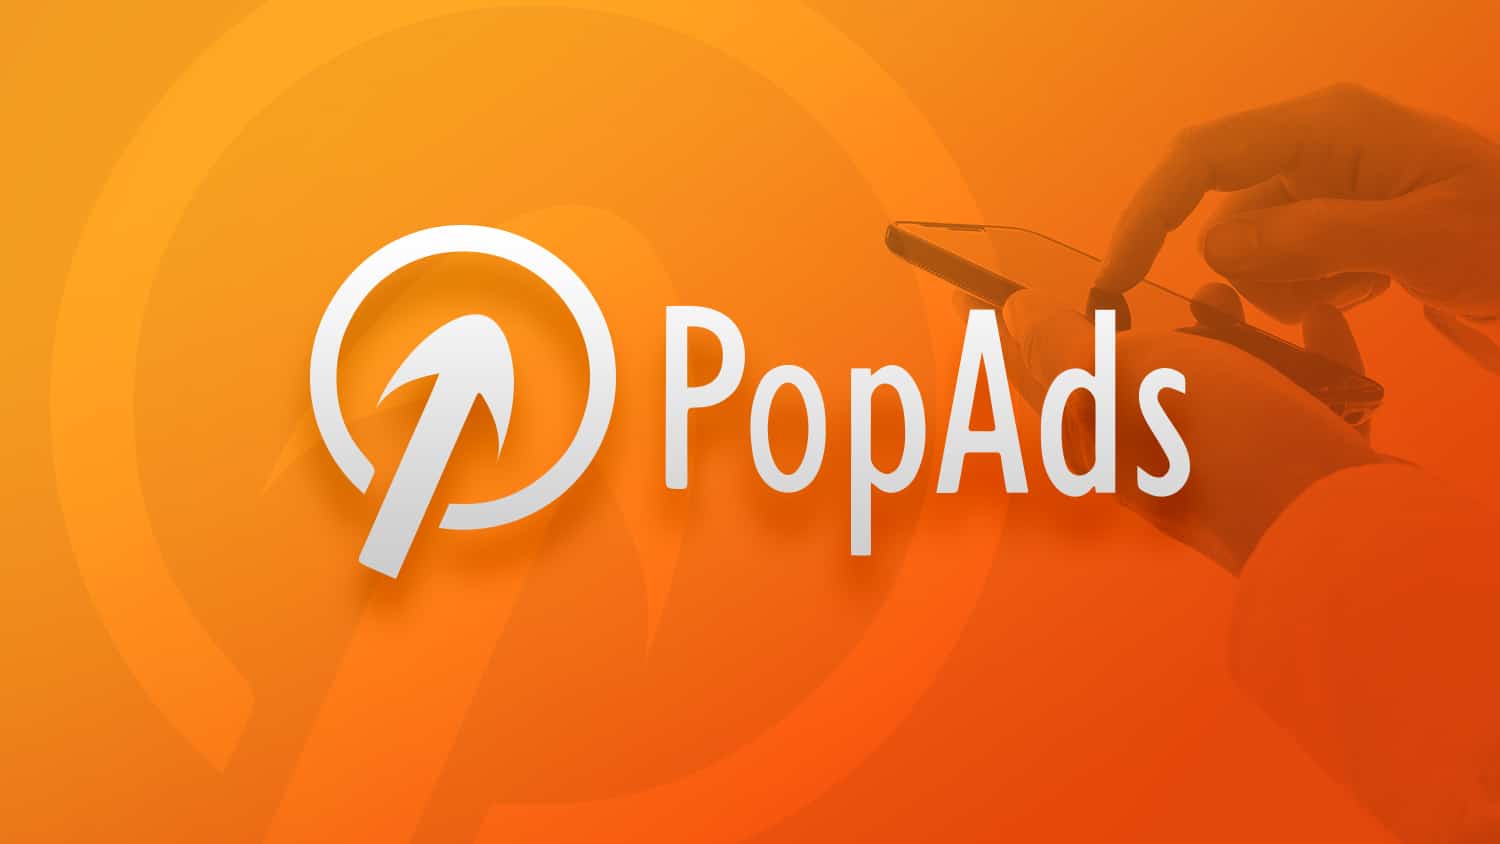 PopAds: The Complete Guide (2017 Update)